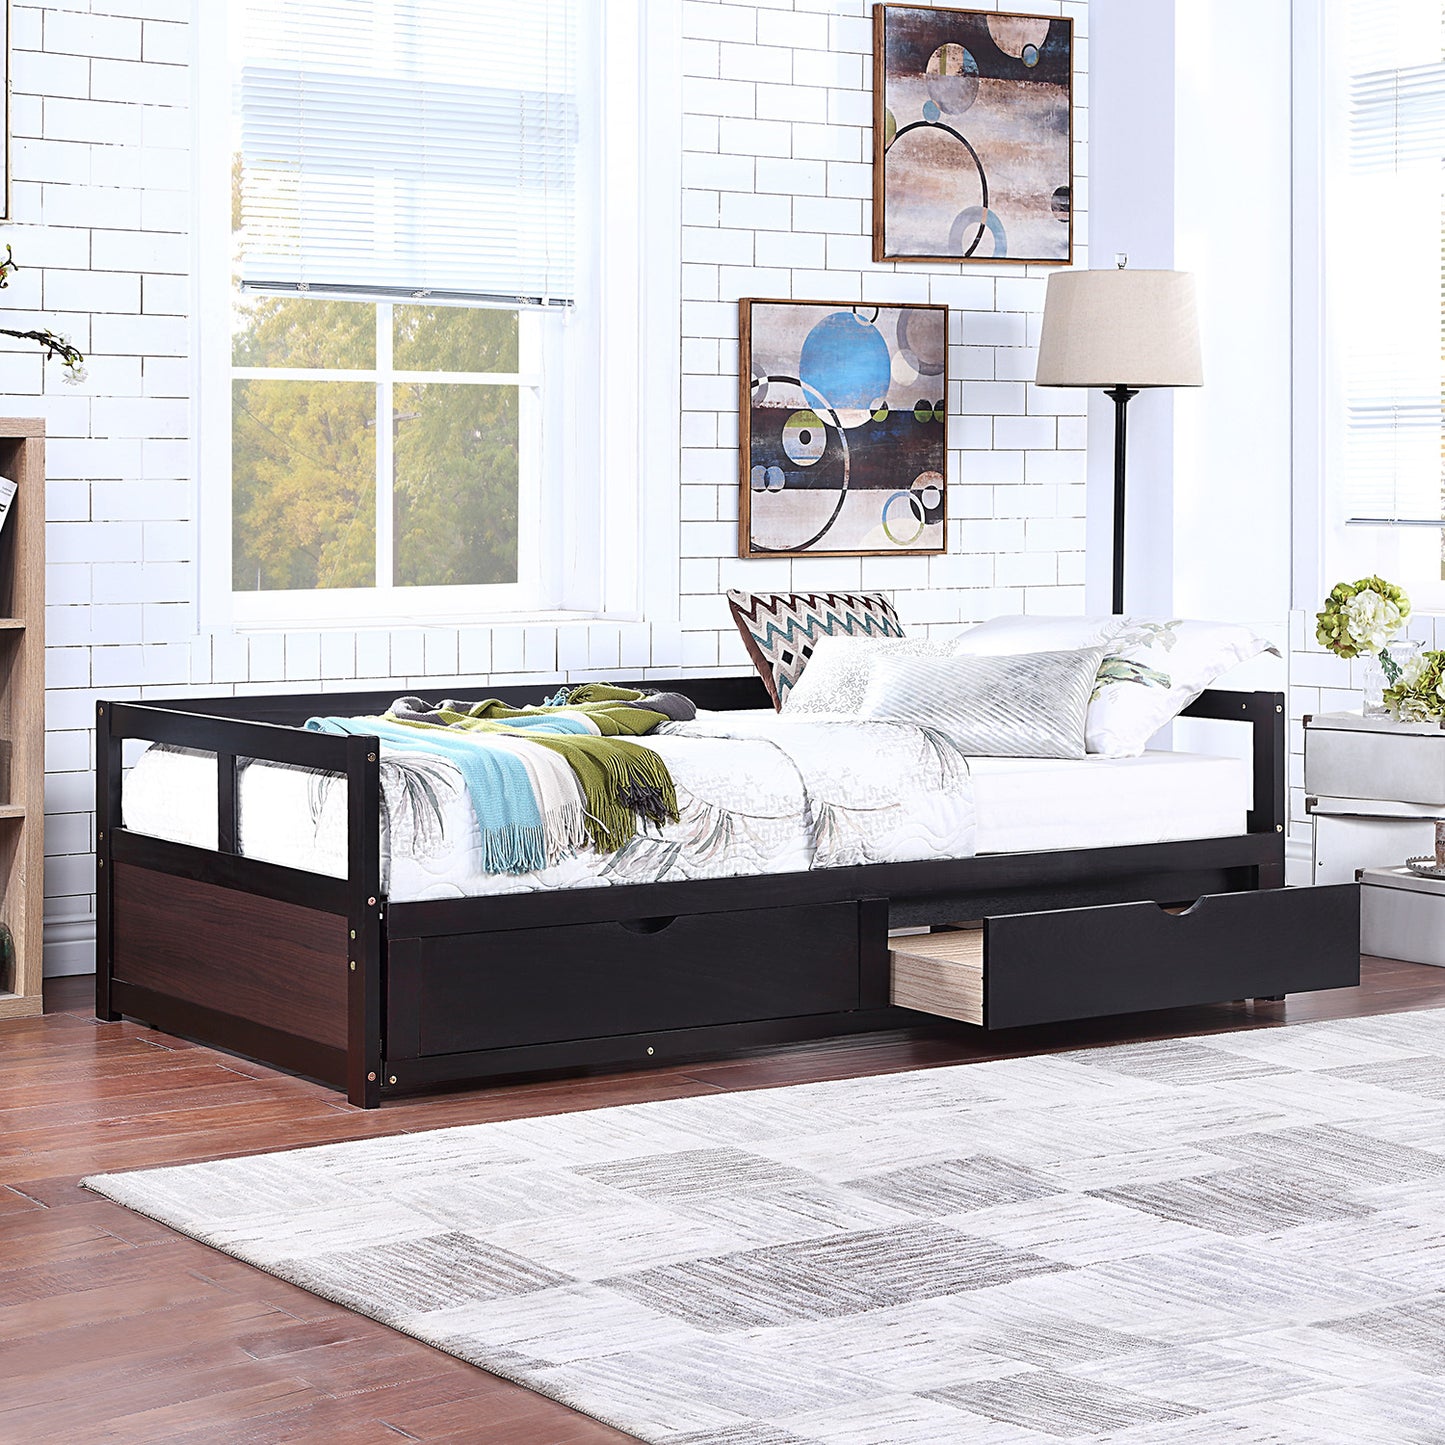 Wooden Daybed with Trundle Bed and Two Storage Drawers , Extendable Bed Daybed,Sofa Bed for Bedroom Living Room,Espresso